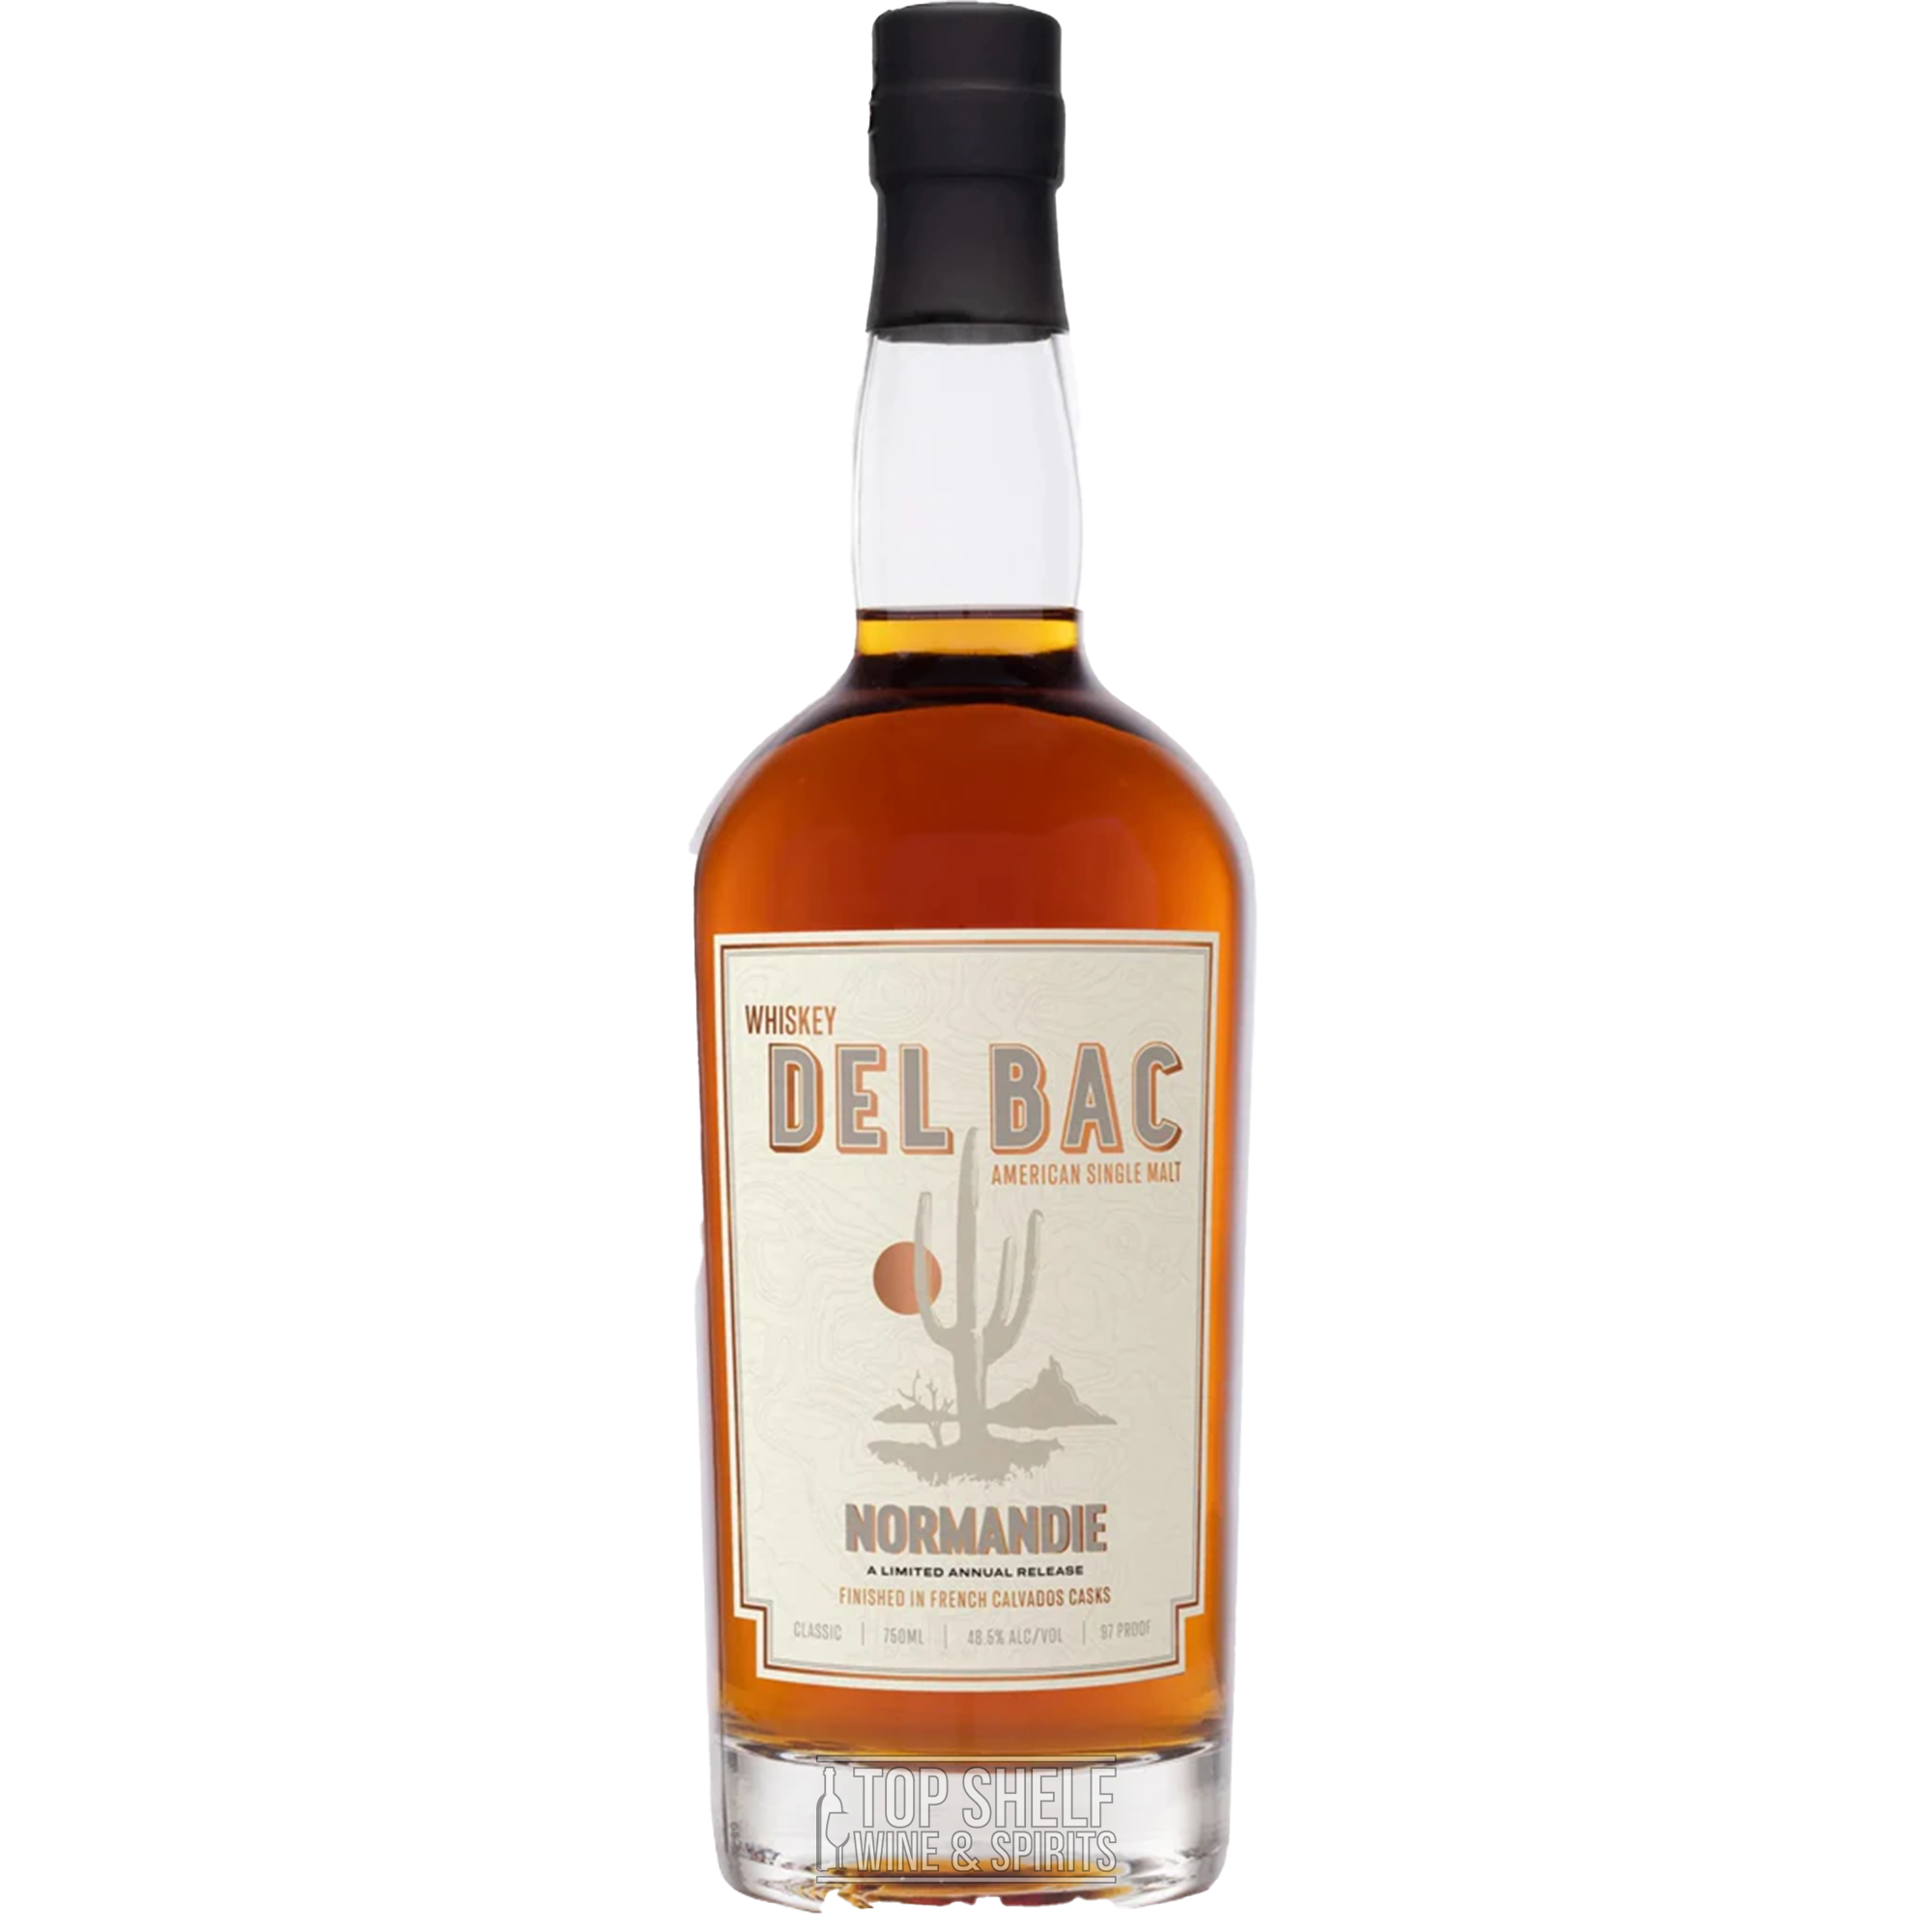 Del Bac Normandie Limited Release Whiskey